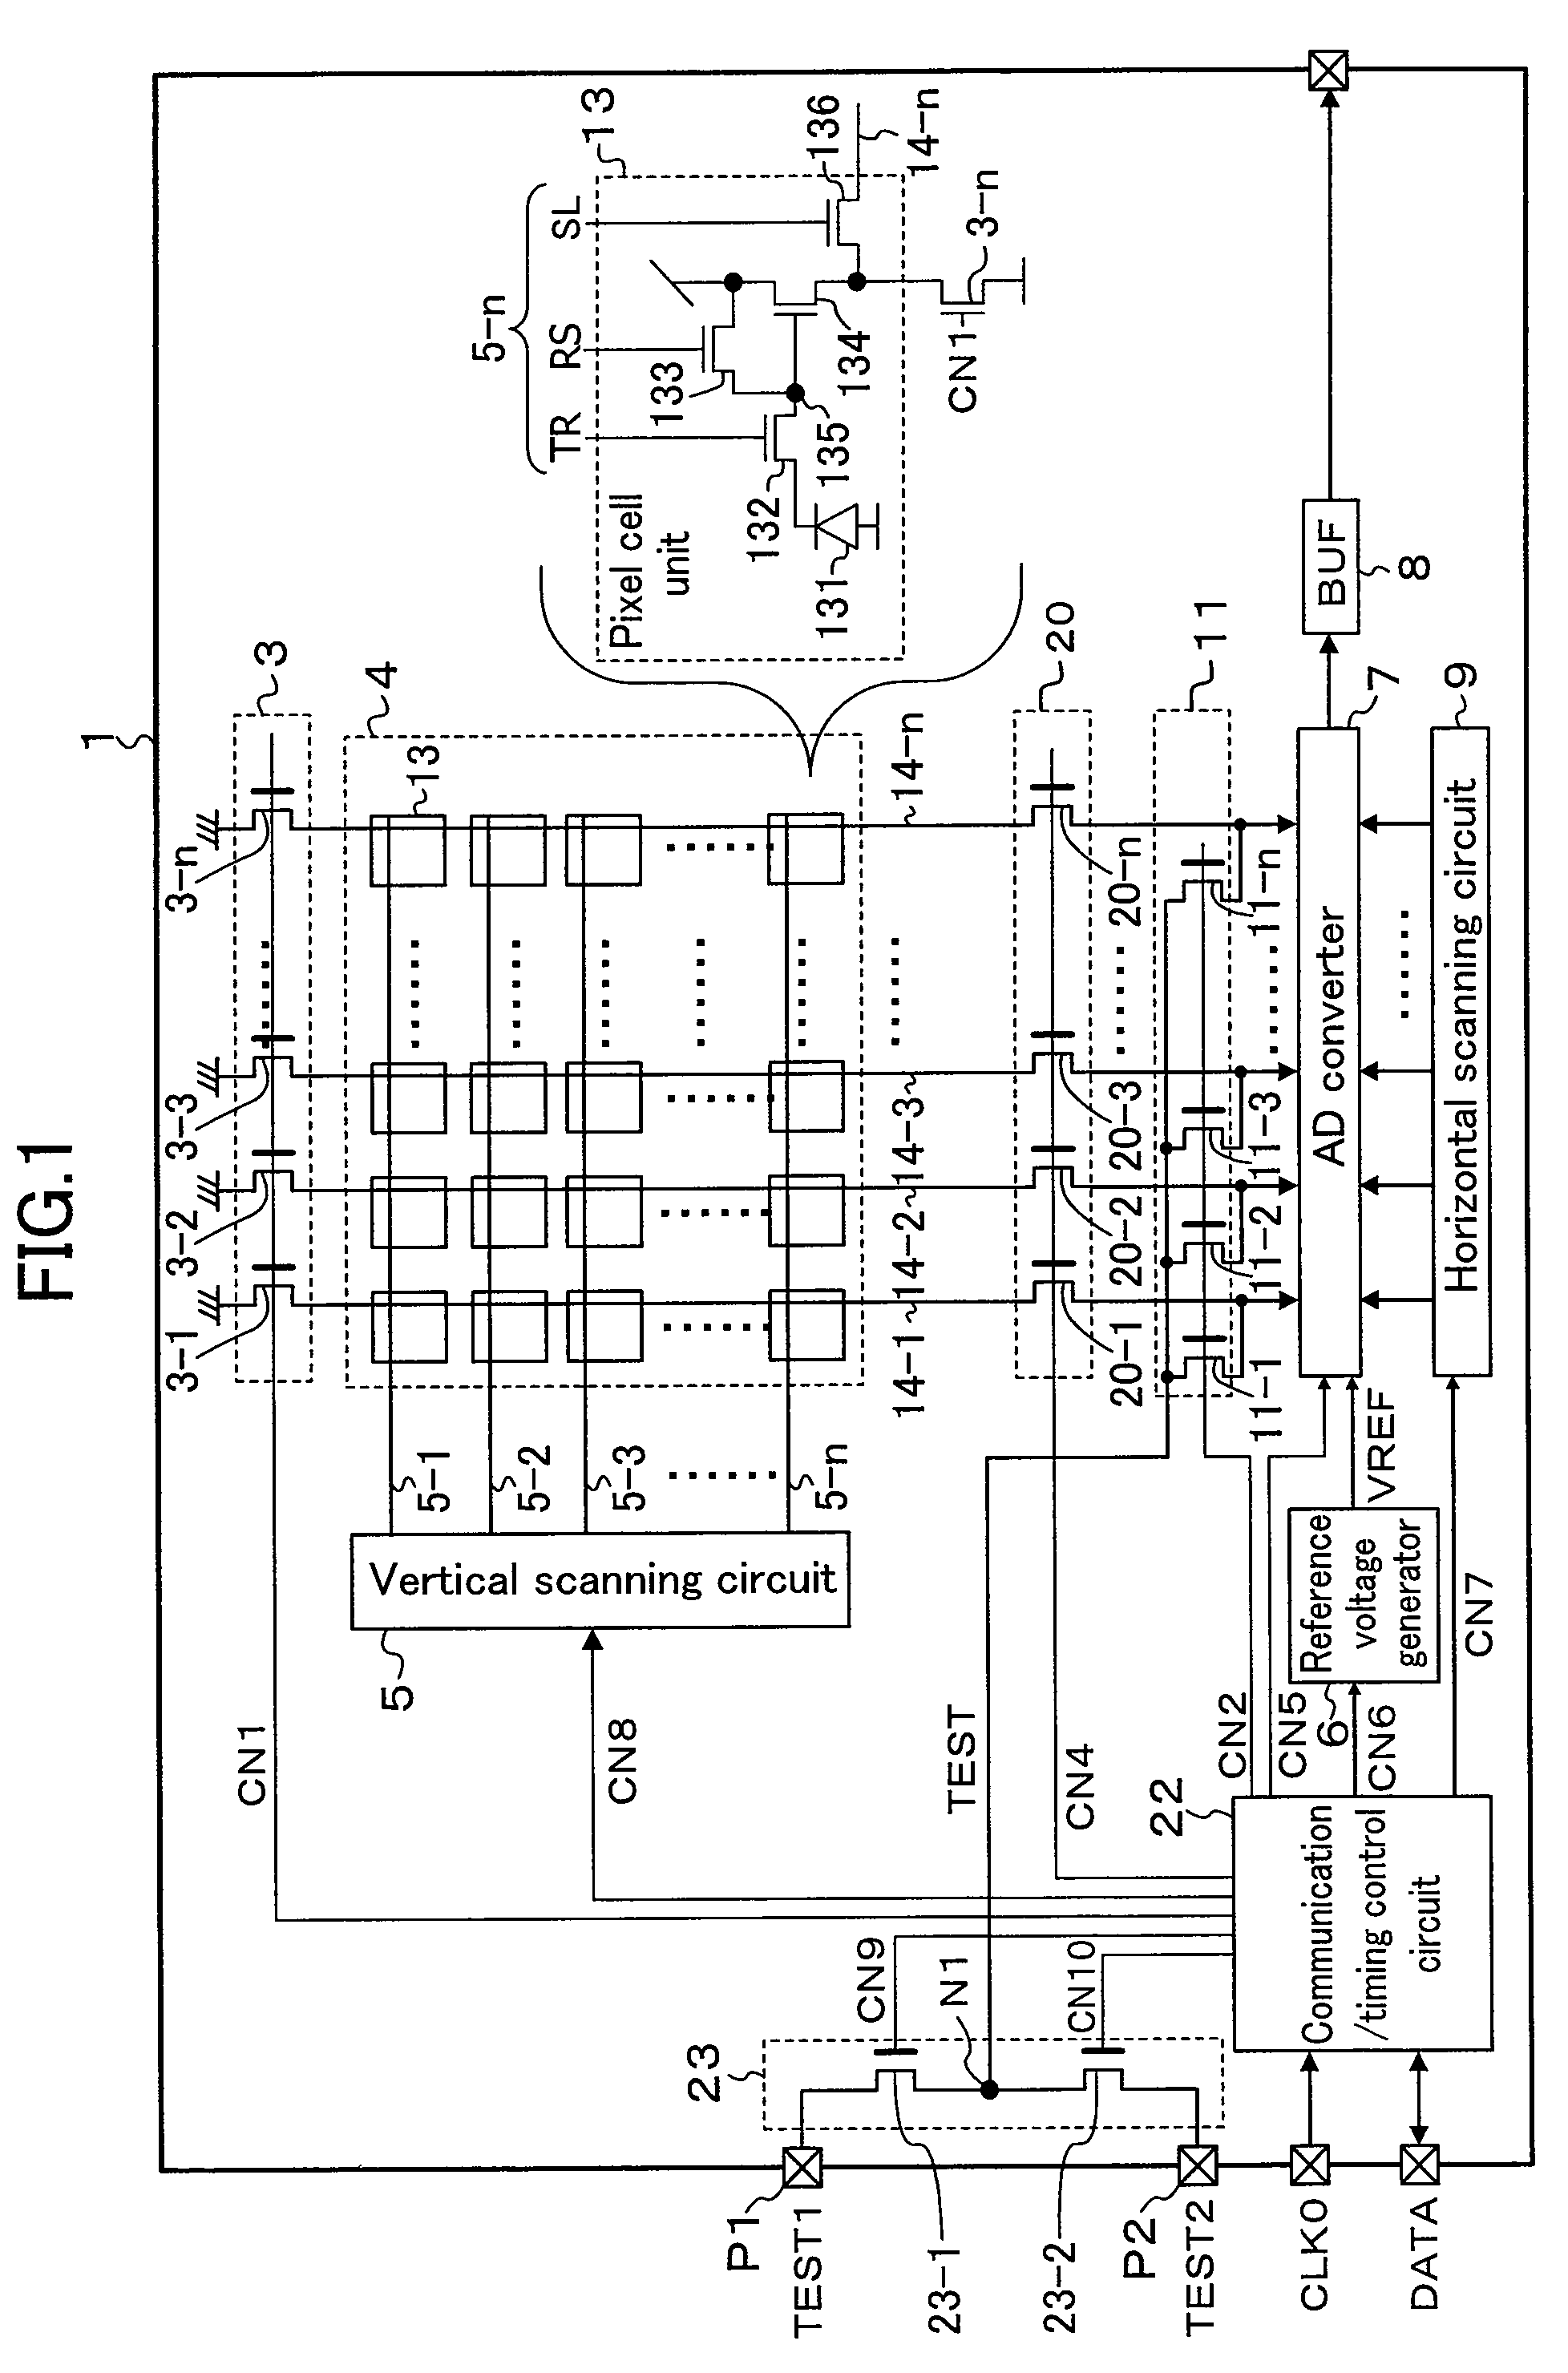 A/d converter-incorporated solid-state imaging device